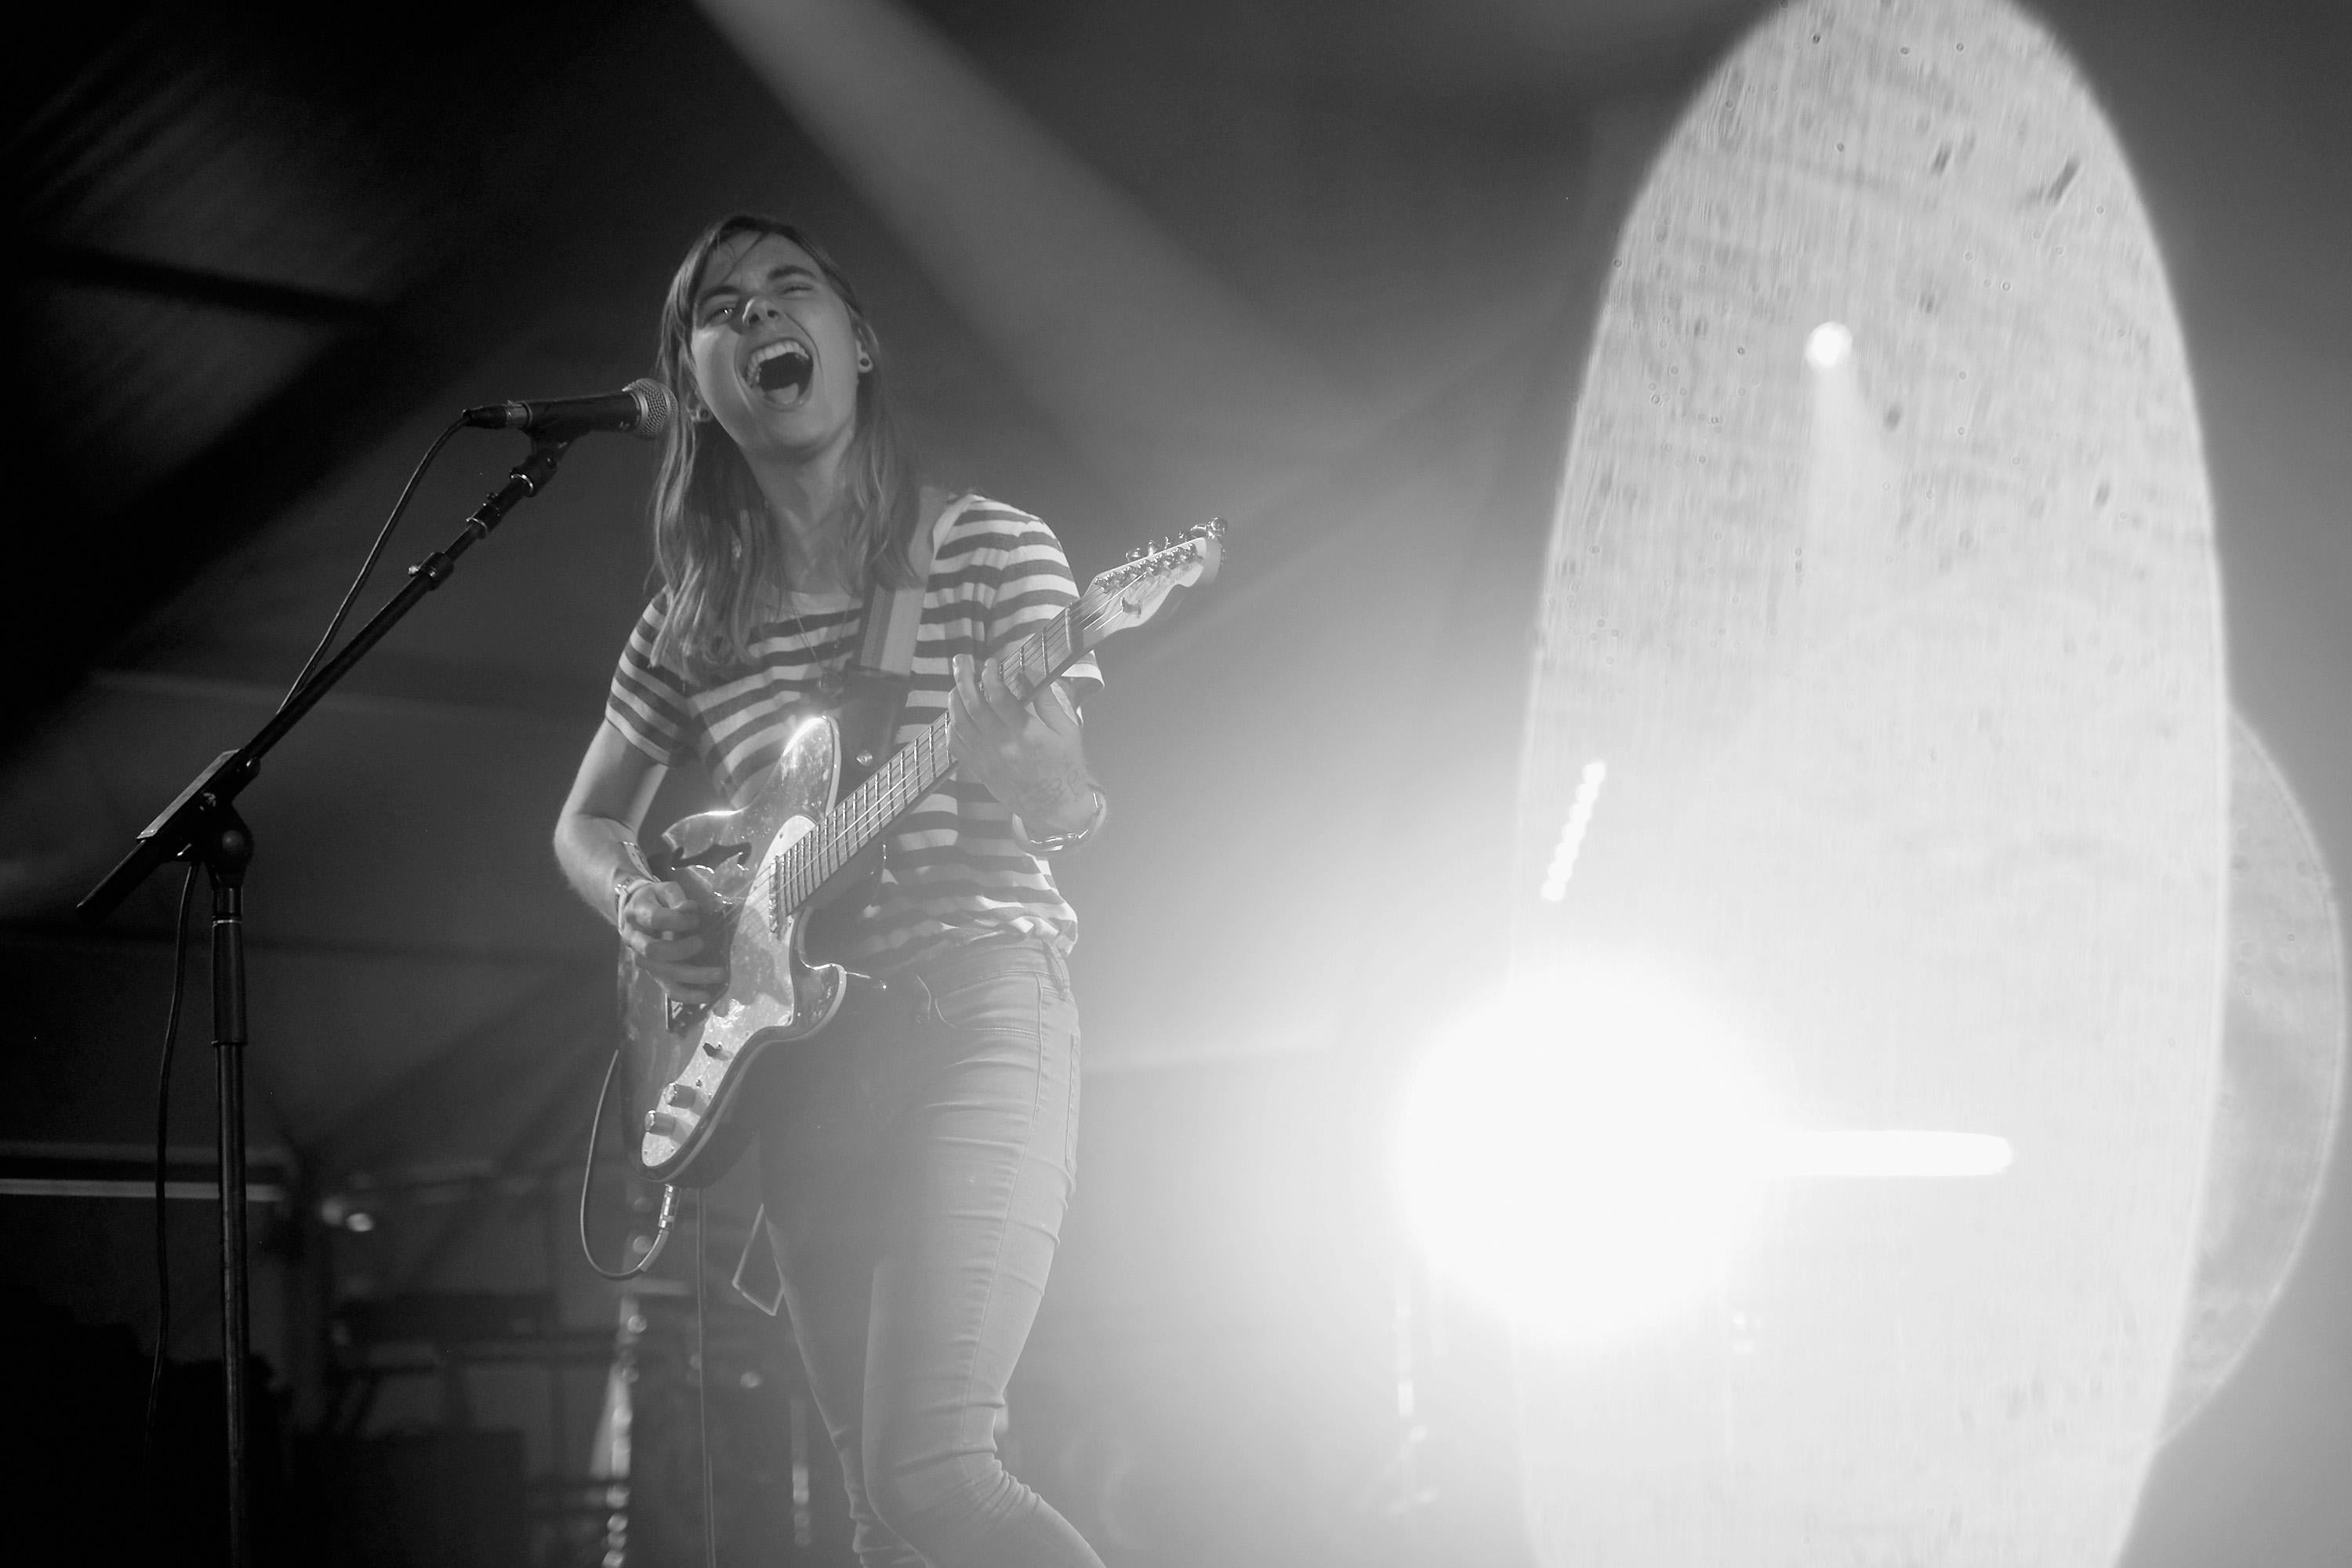 A woman with shoulder-length hair performs on stage. She is playing a guitar and singing while wearing a t-shirt and jeans.